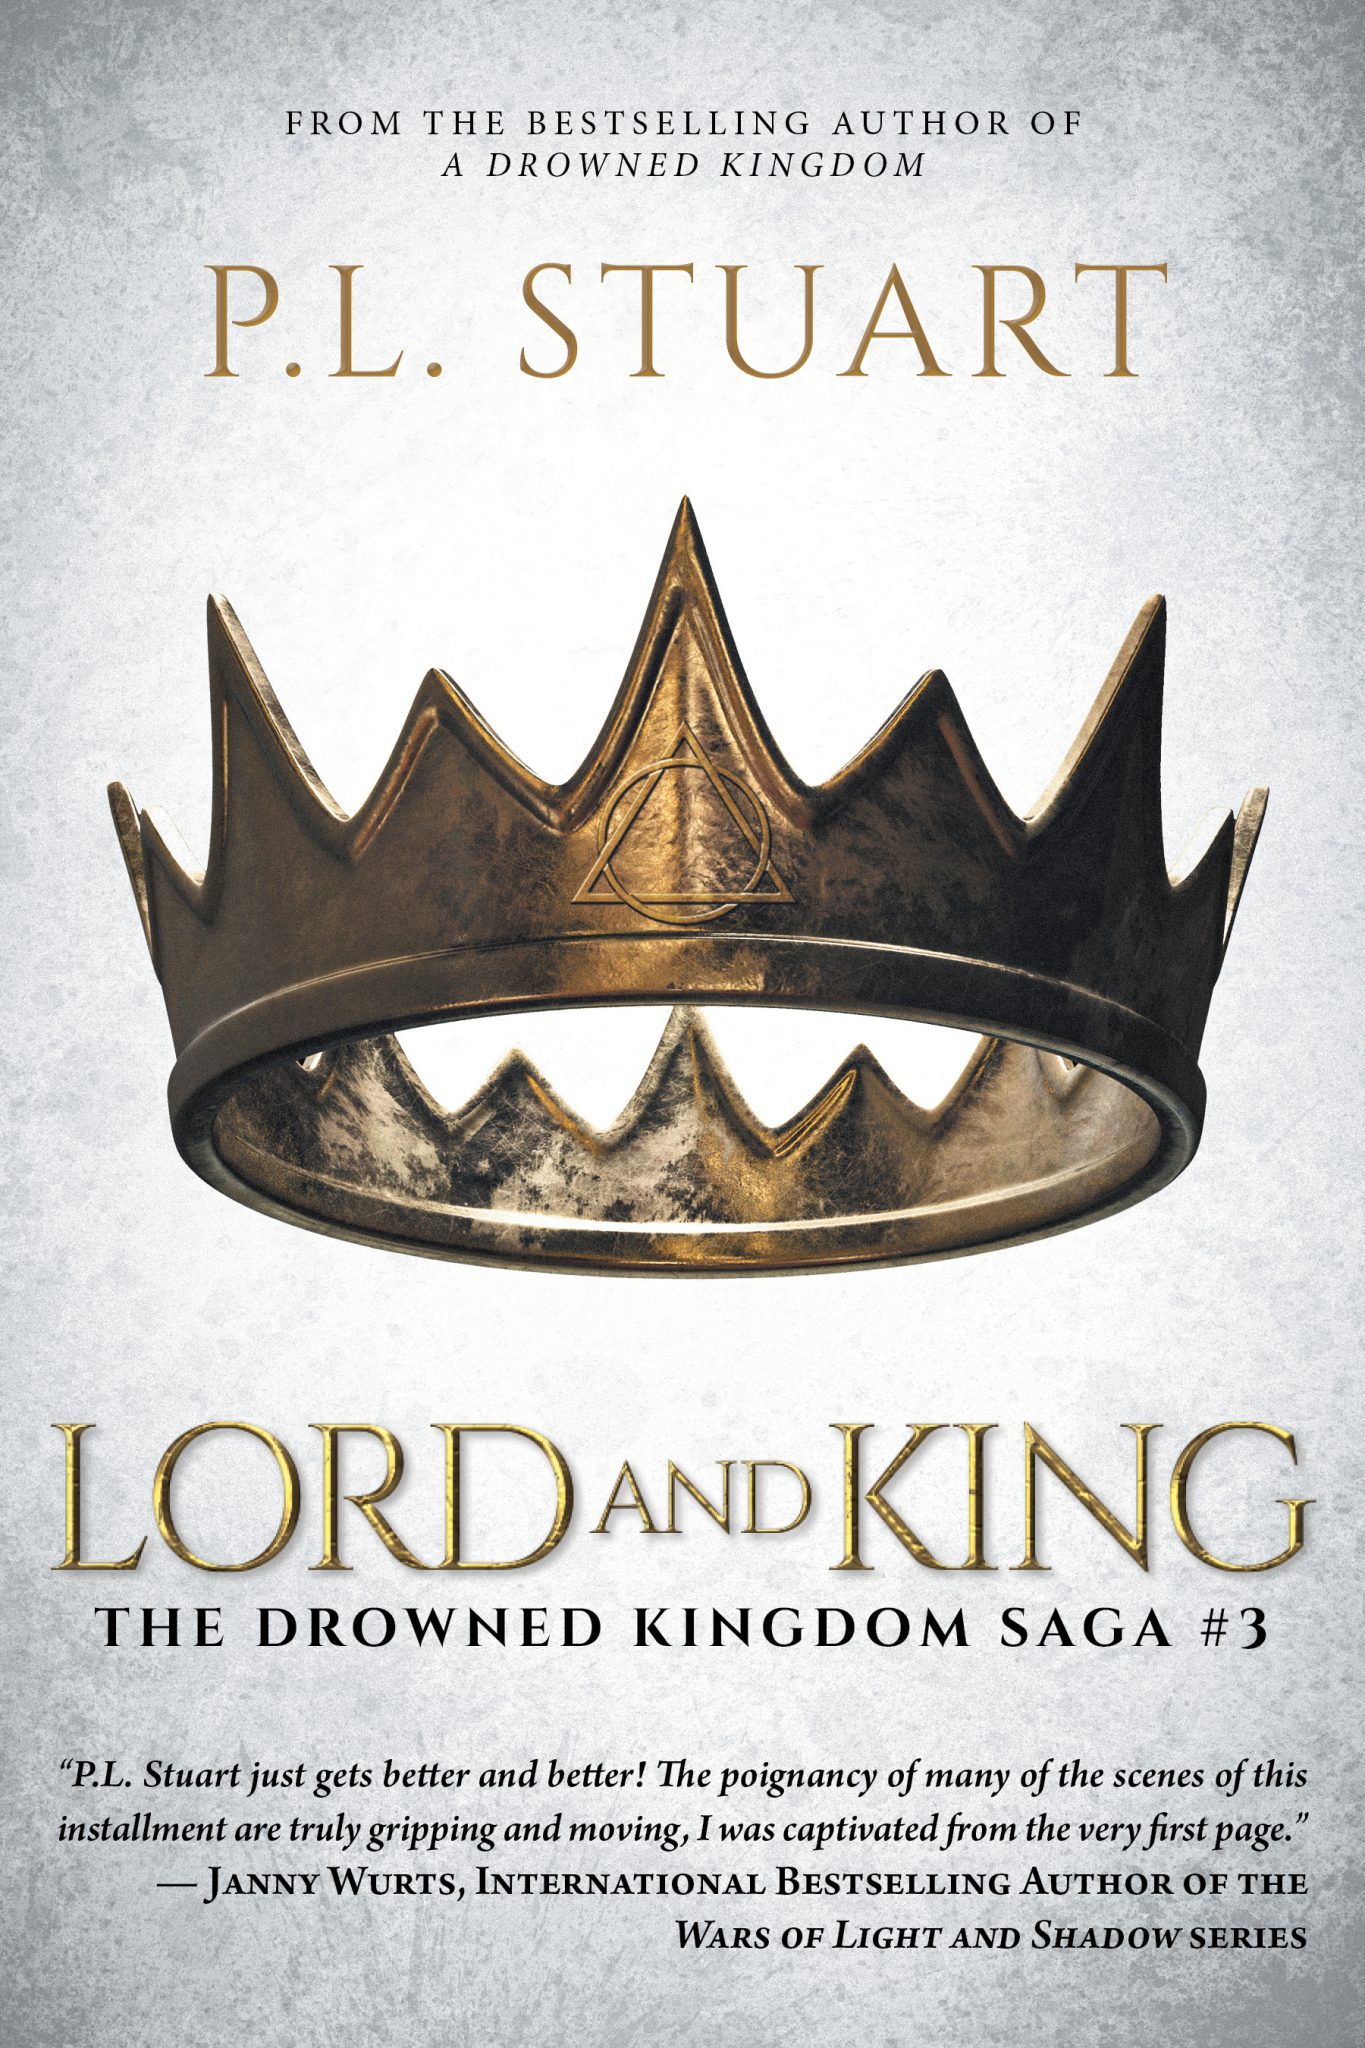 Lord and King by P.L. Stuart